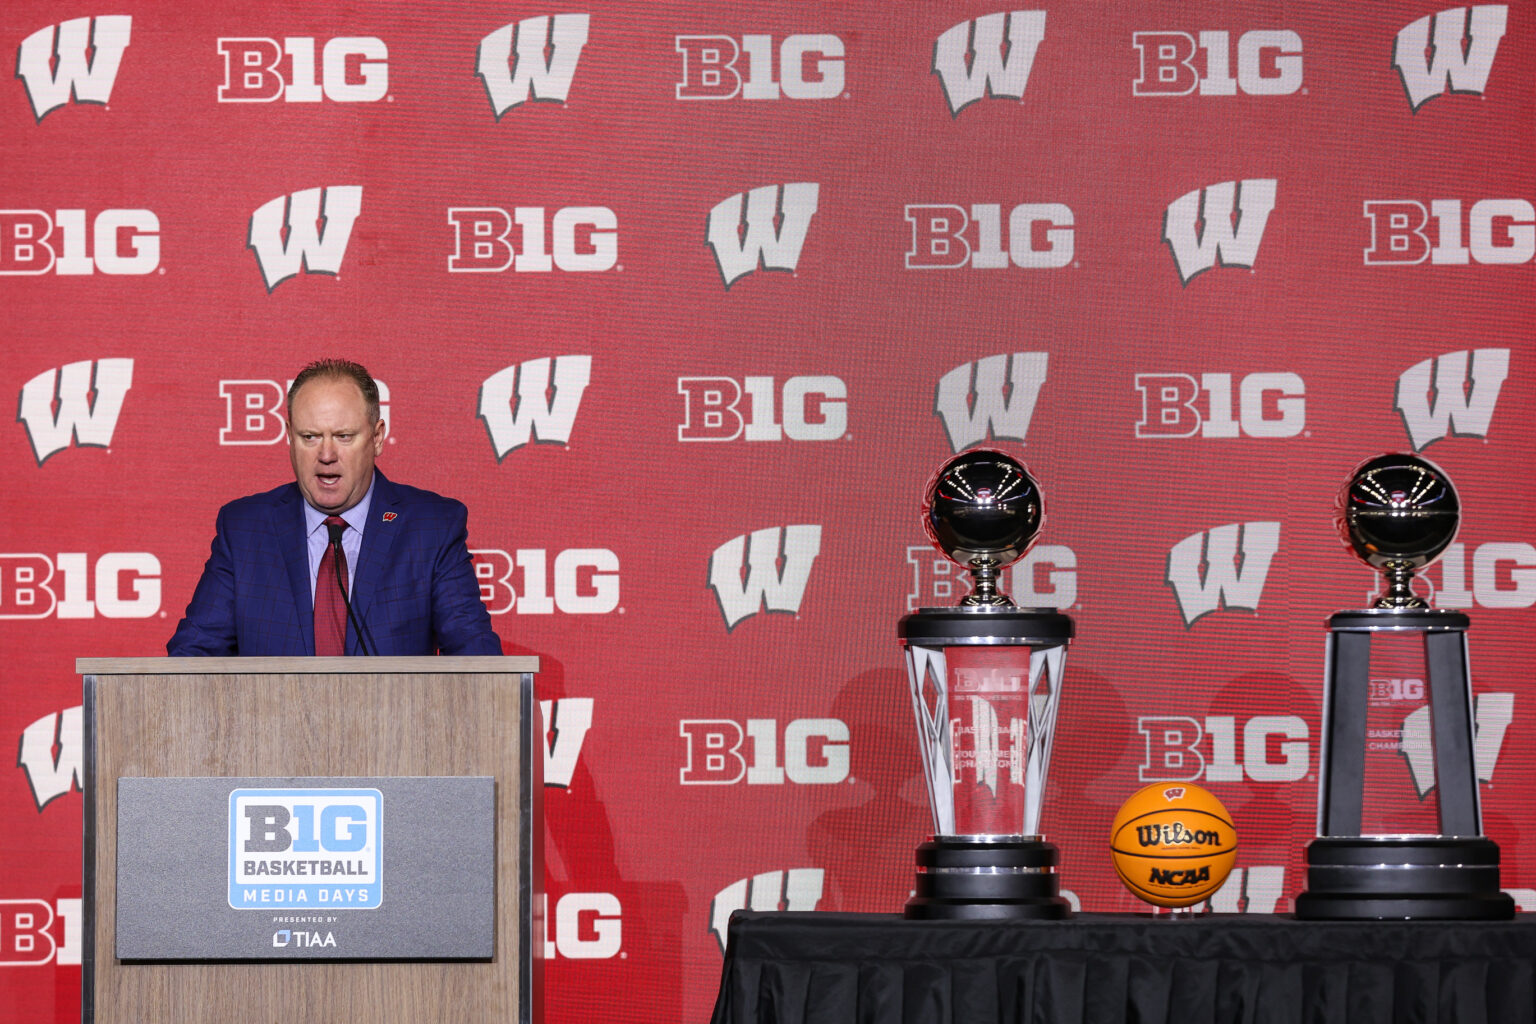 Wisconsin basketball head coach Greg Gard speaks at Big Ten Media Days. A few months later, the Big Ten conference would announce new formats to its men's and women's basketball championships after adding new teams to the conference